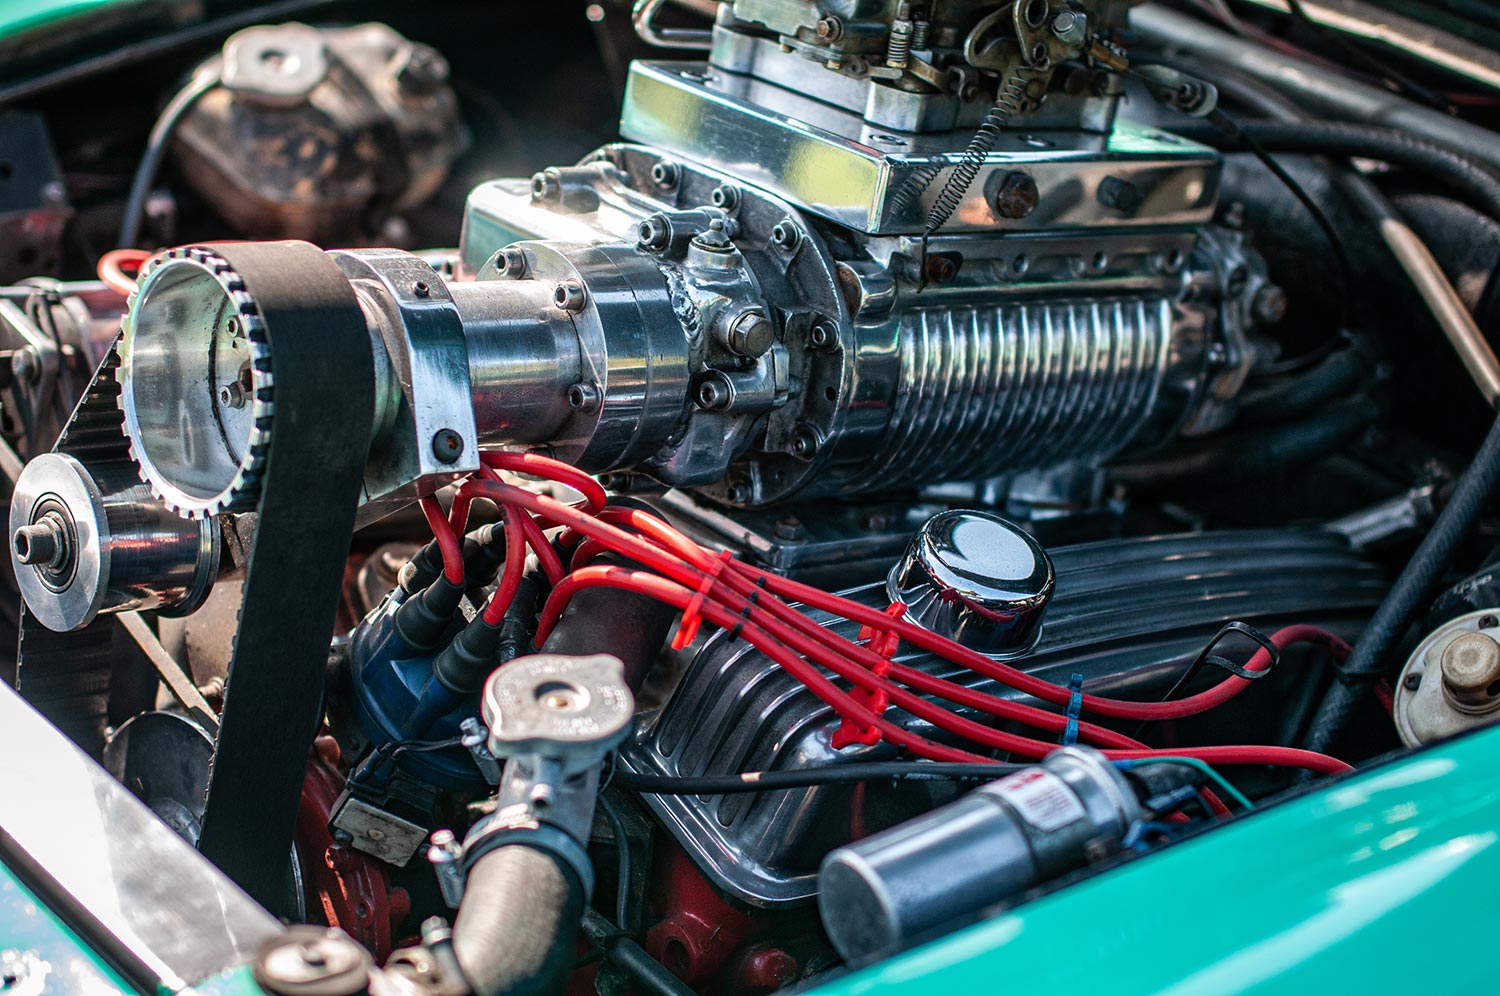 Classic car engine accompanied by a huge supercharger.